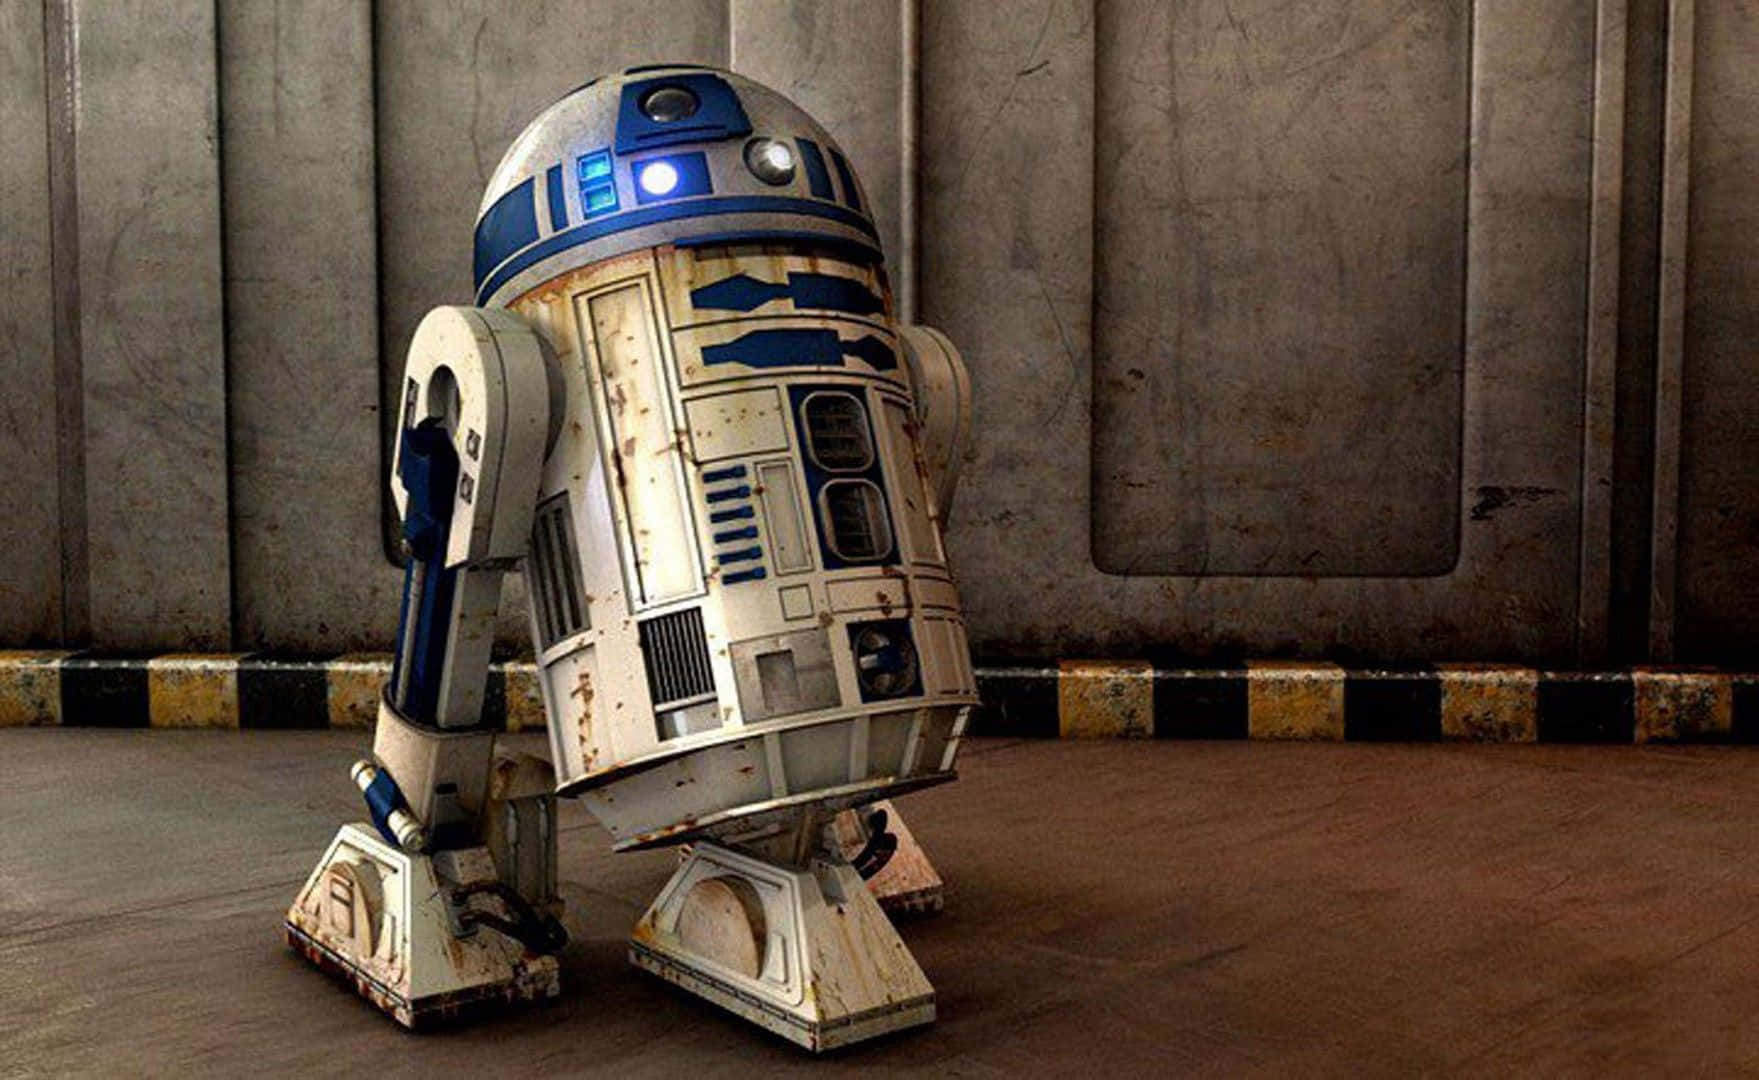 R2-d2, The Iconic Droid From The Star Wars Franchise Background